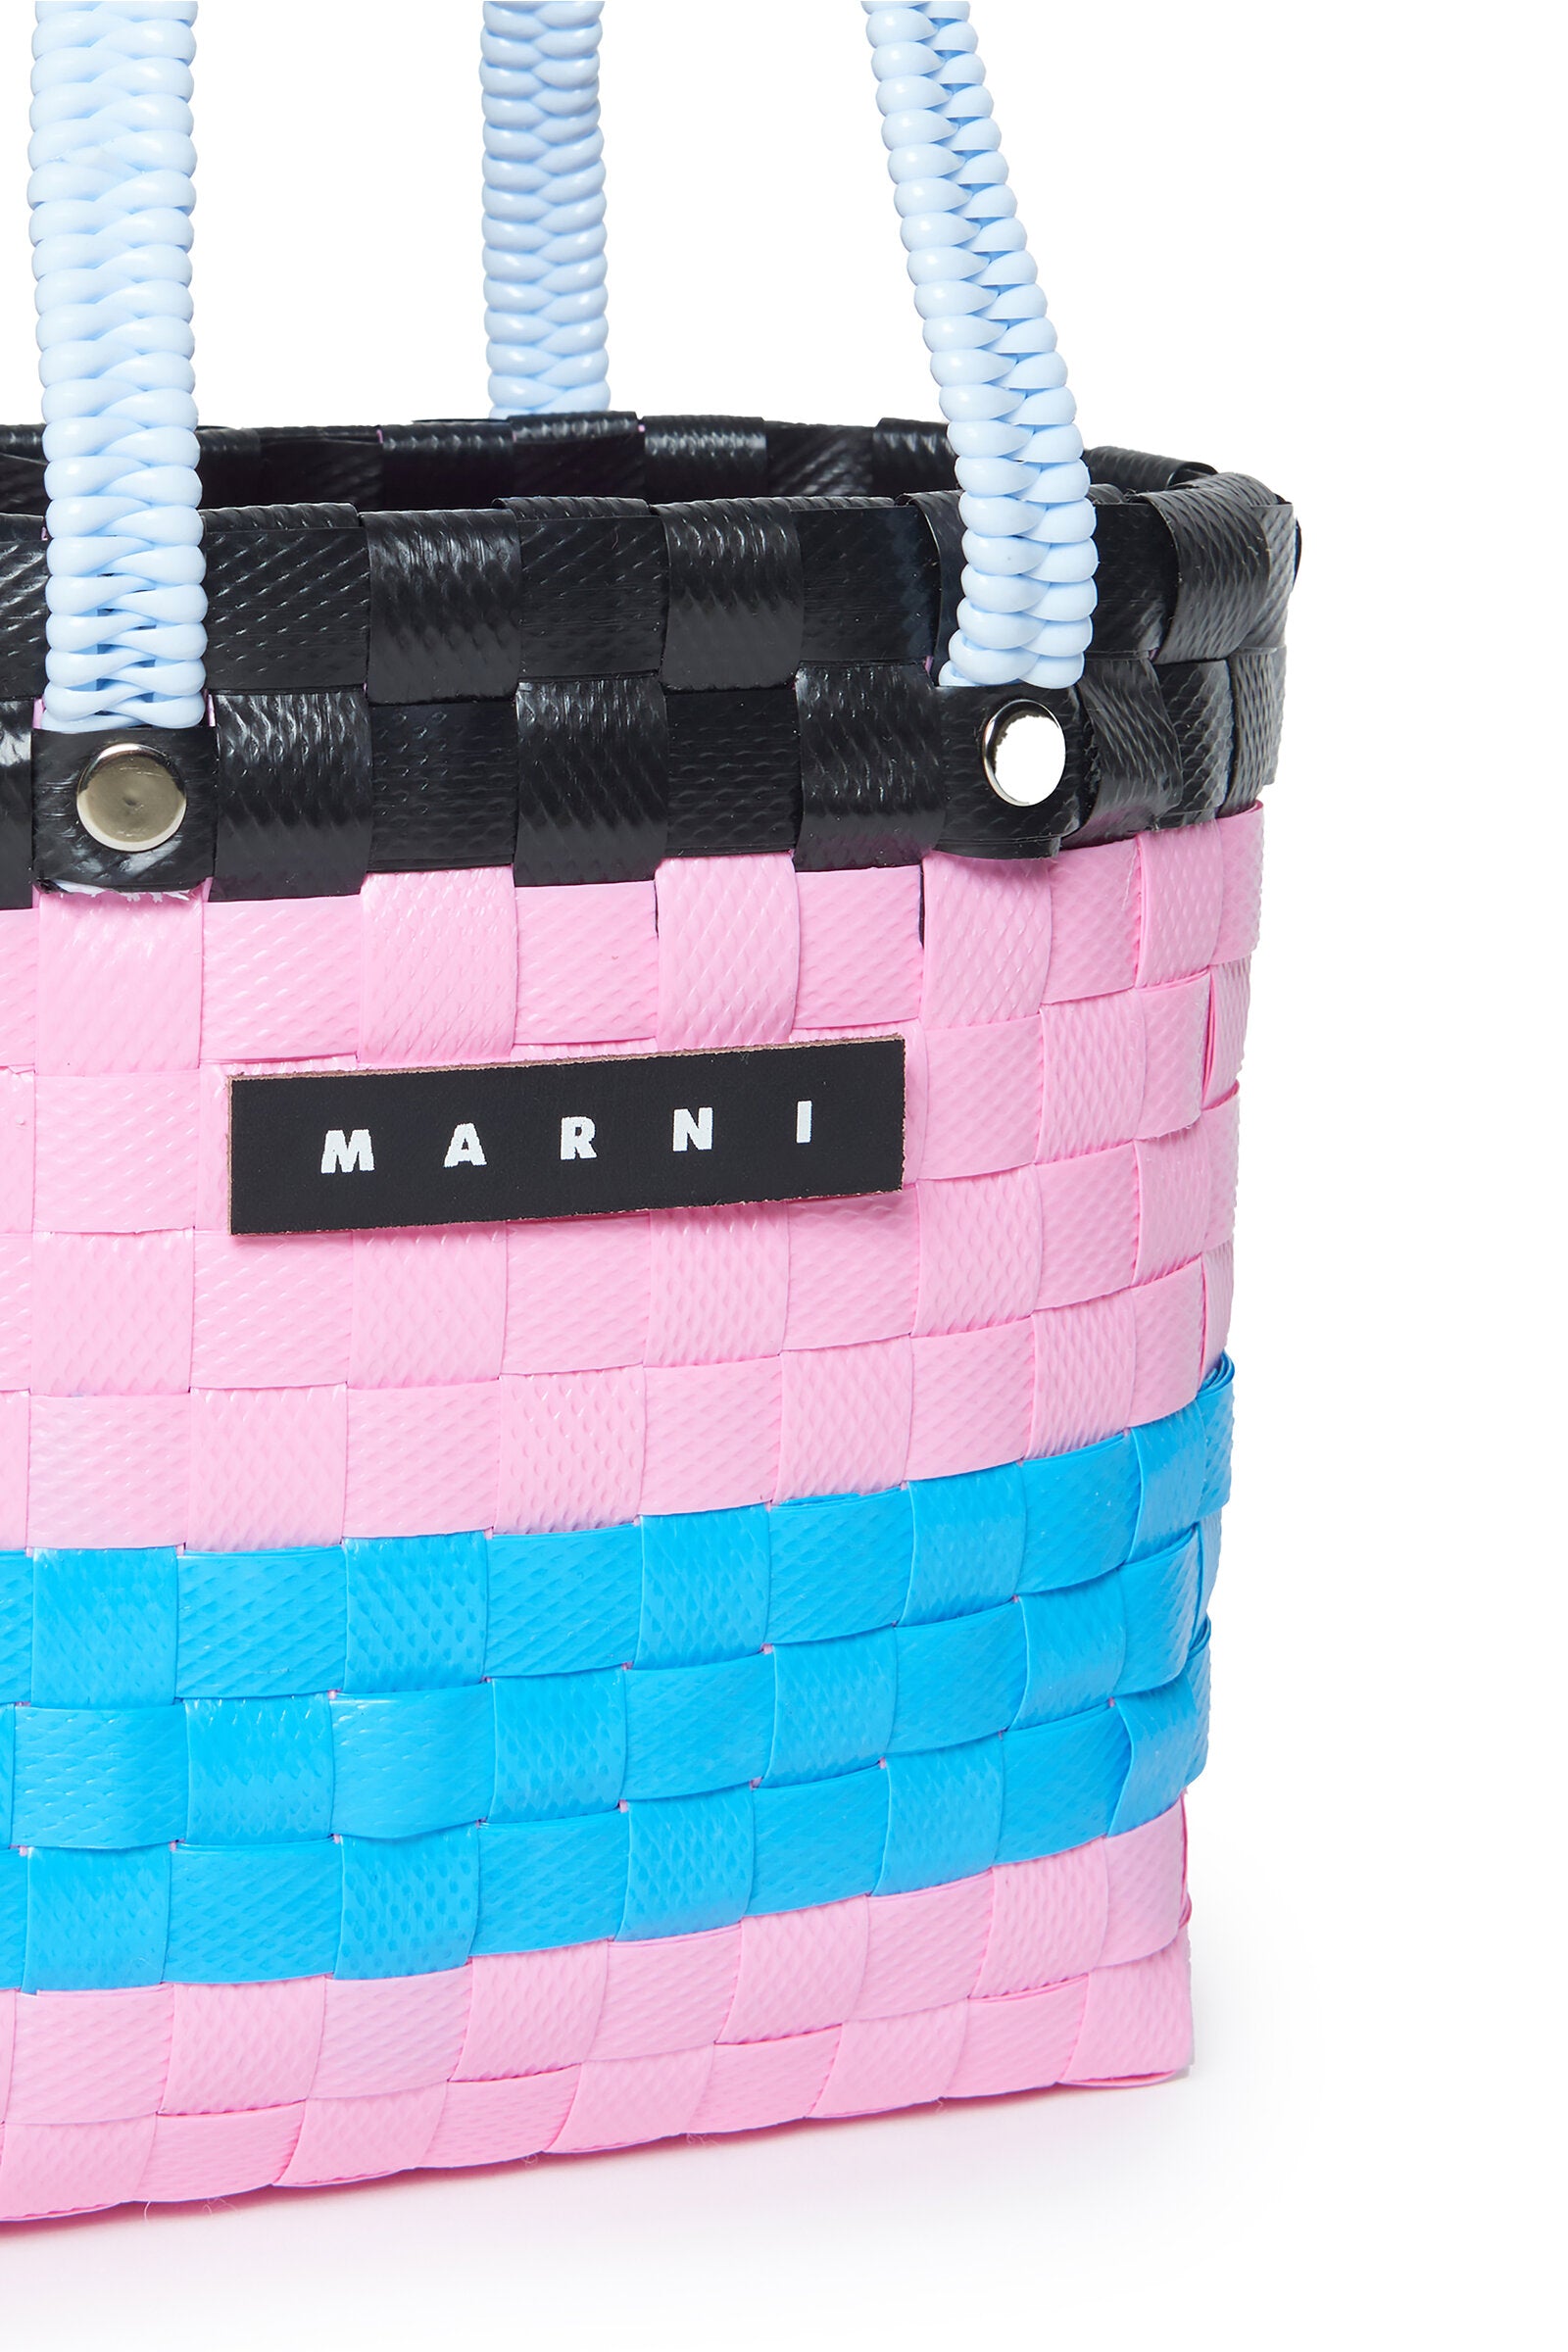 Marni pink woven Sunday morning bag with handles and applied logo